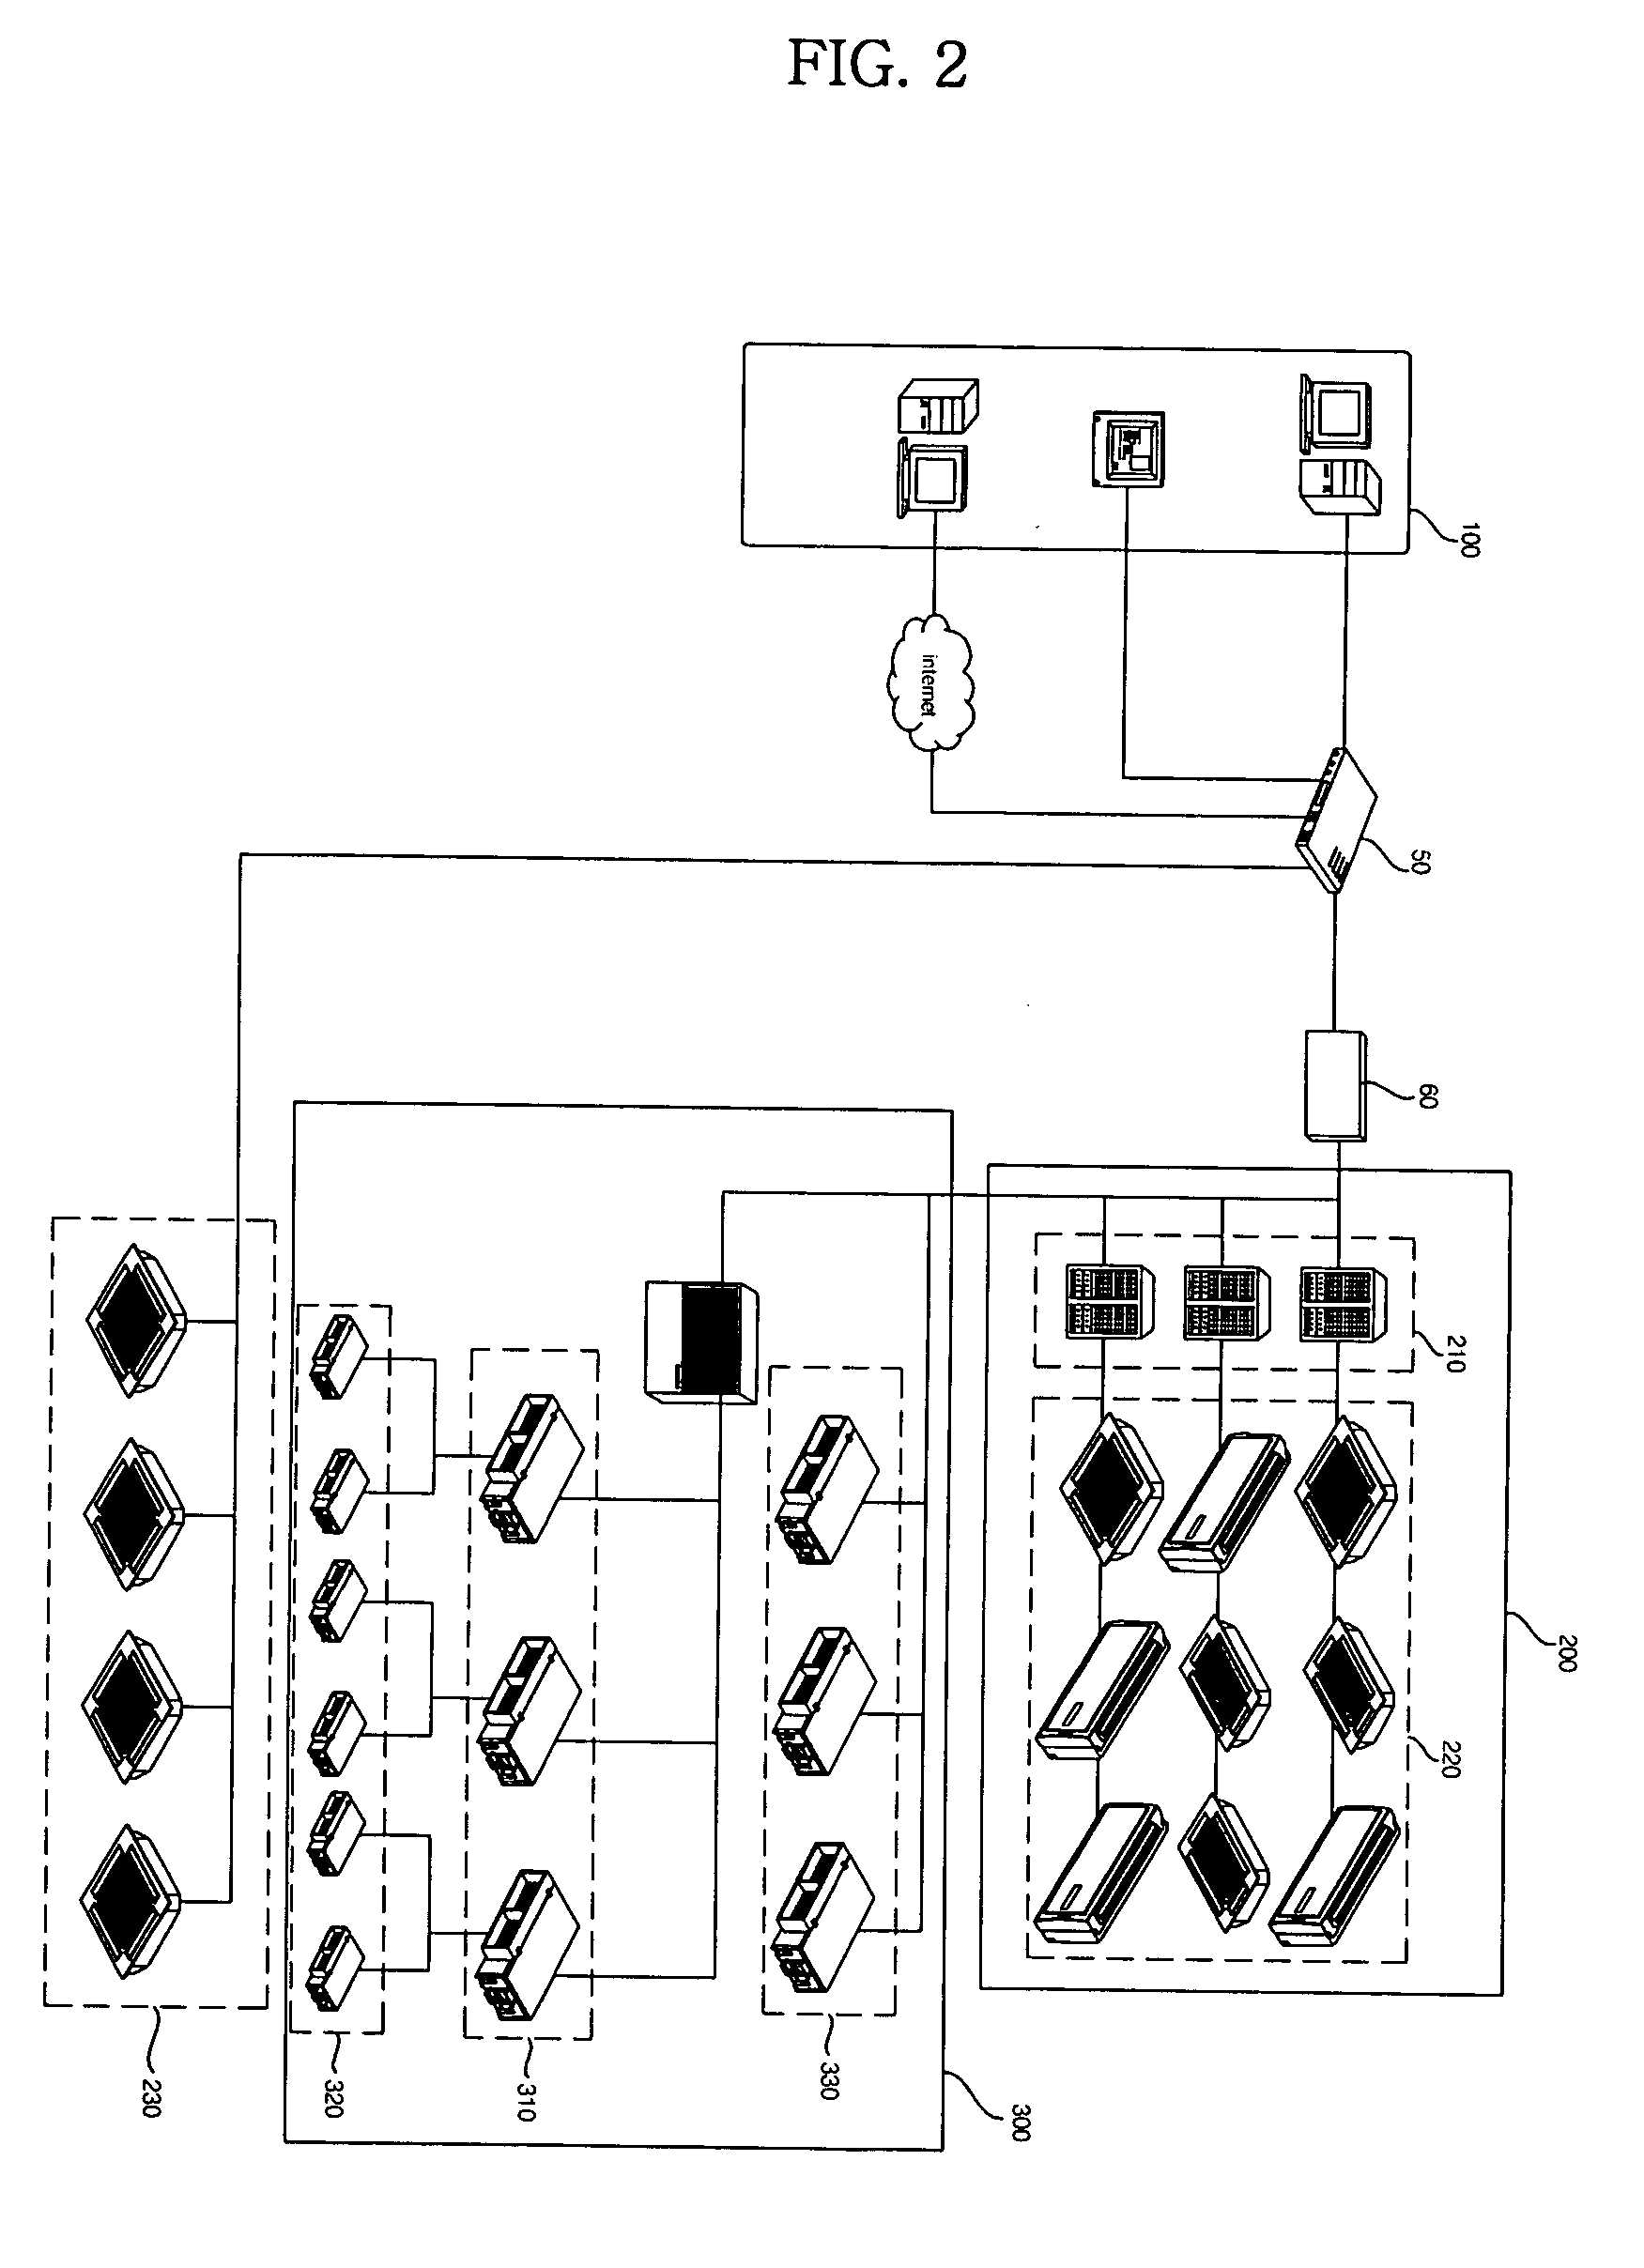 Multi-air conditioner central control system